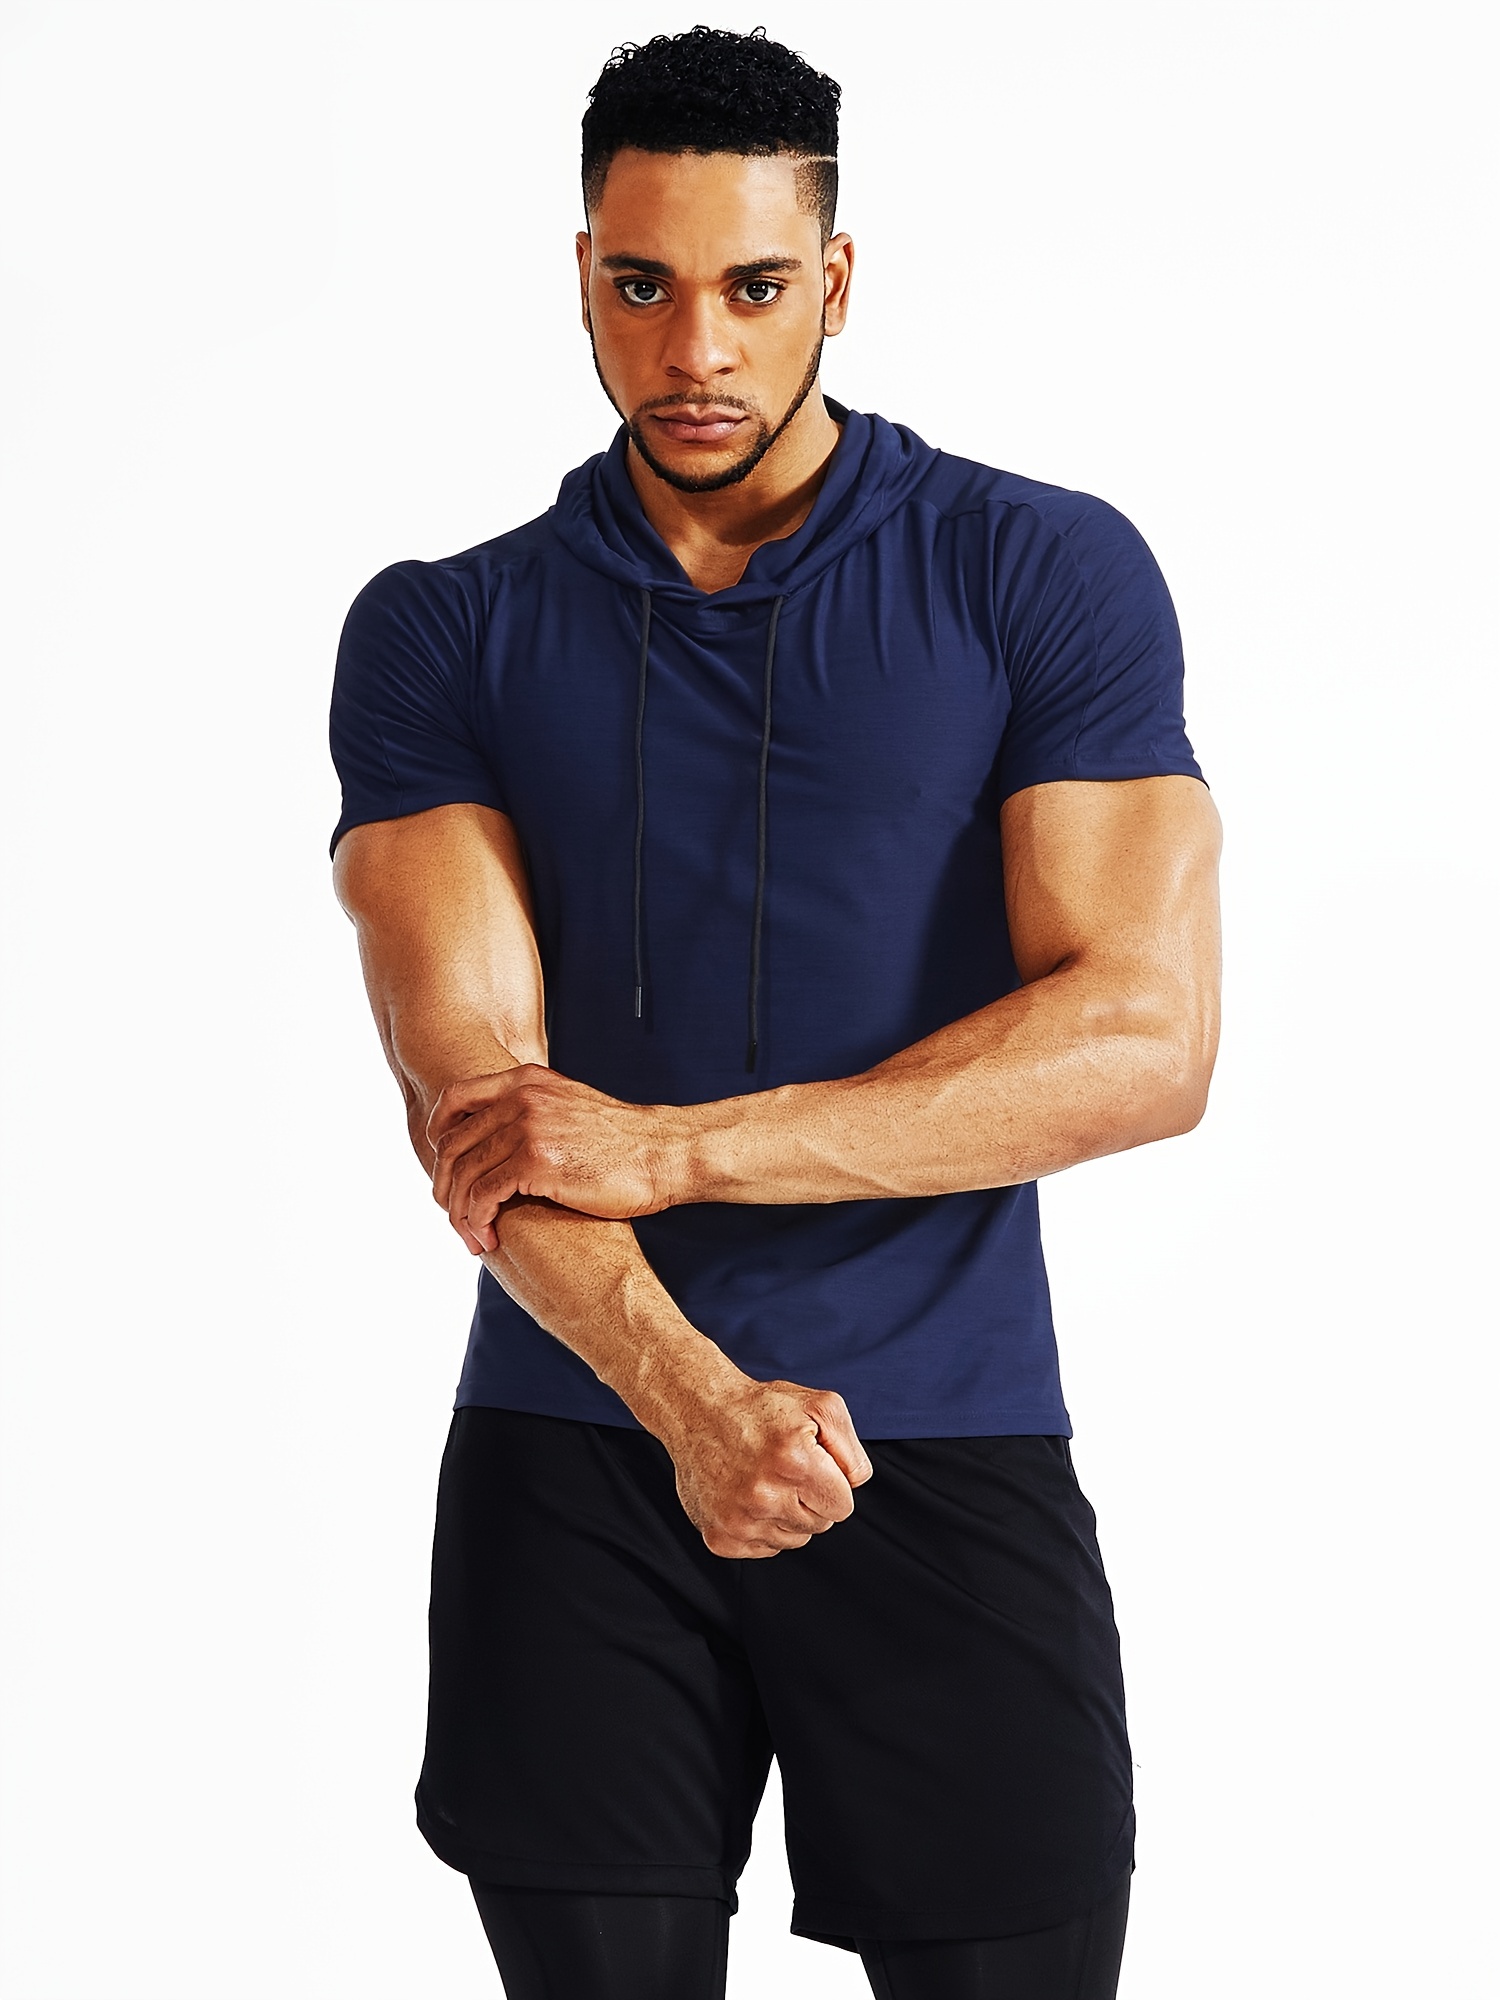 Short Sleeve Workout Shirts for Men - Fitted Fit for Training